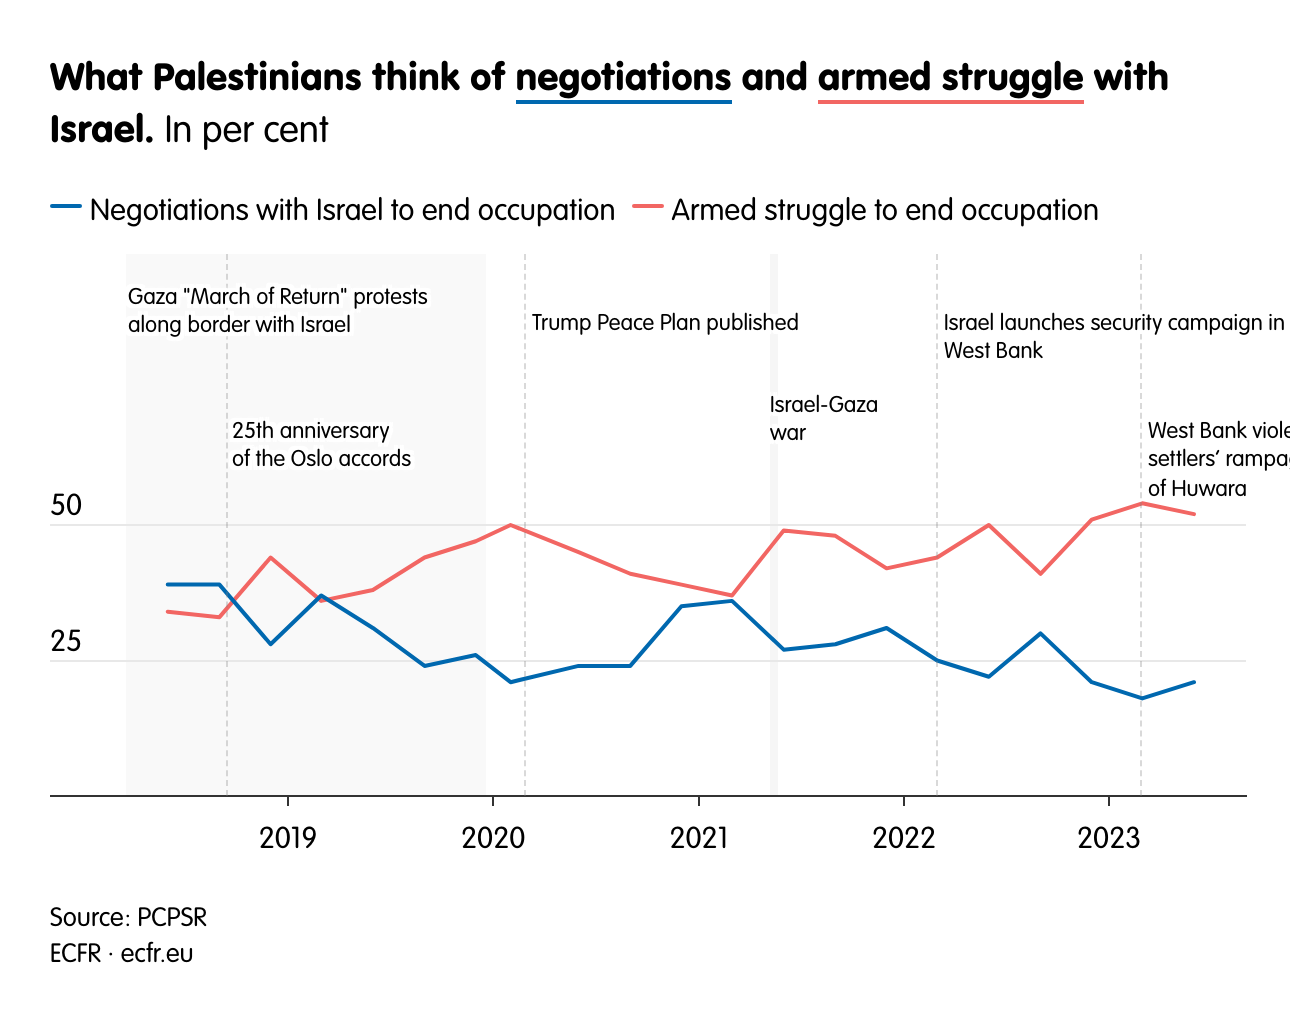 What Palestinians think of negotiations and armed struggle with Israel.